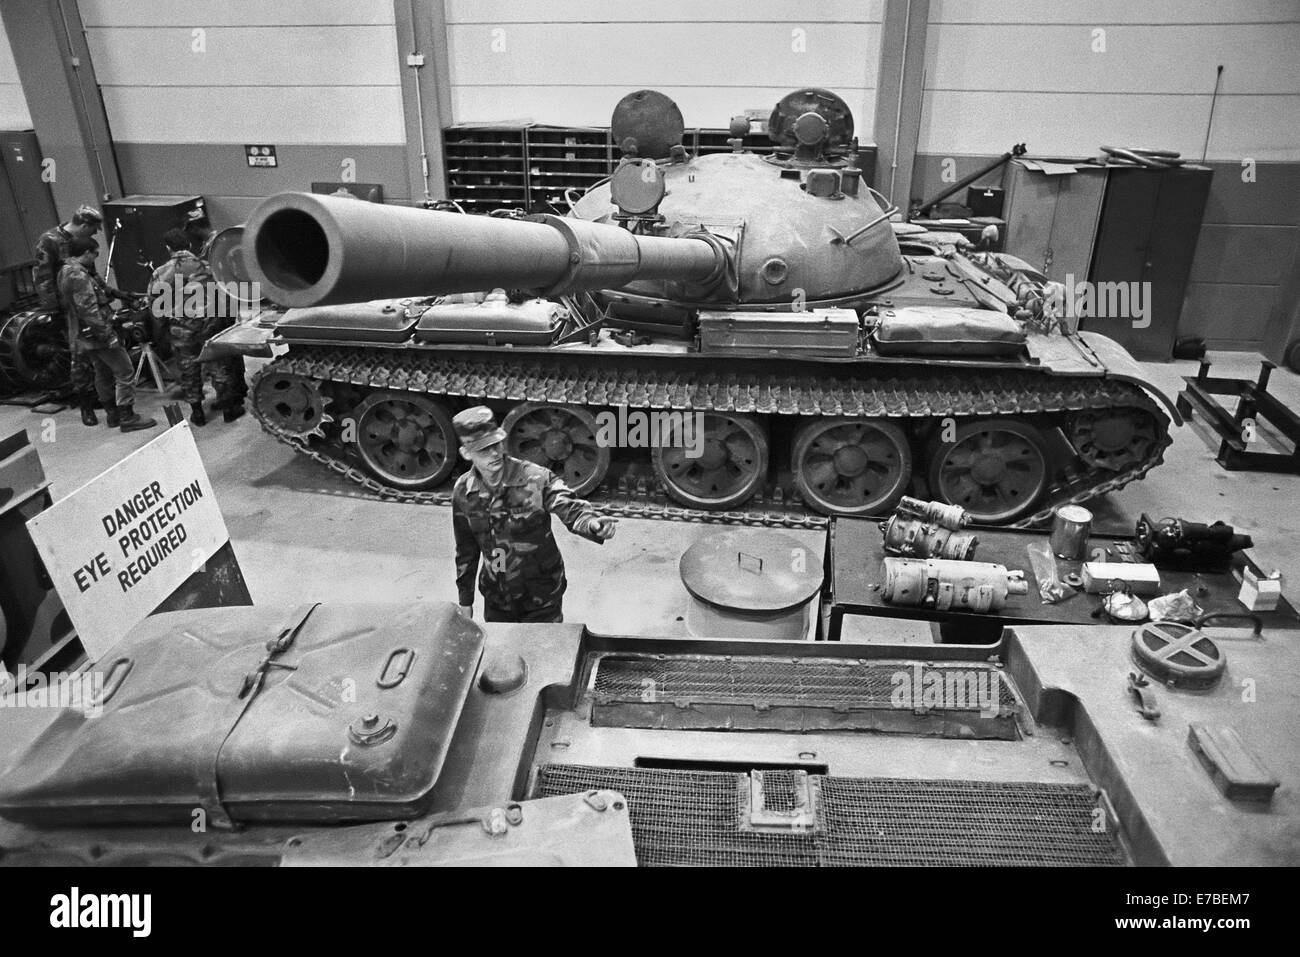 U.S.Army in Germany, Foreign Materials Training Detachment (FMTD) at Grafenwoehr training area, Soviet tank T-55 in workshop Stock Photo